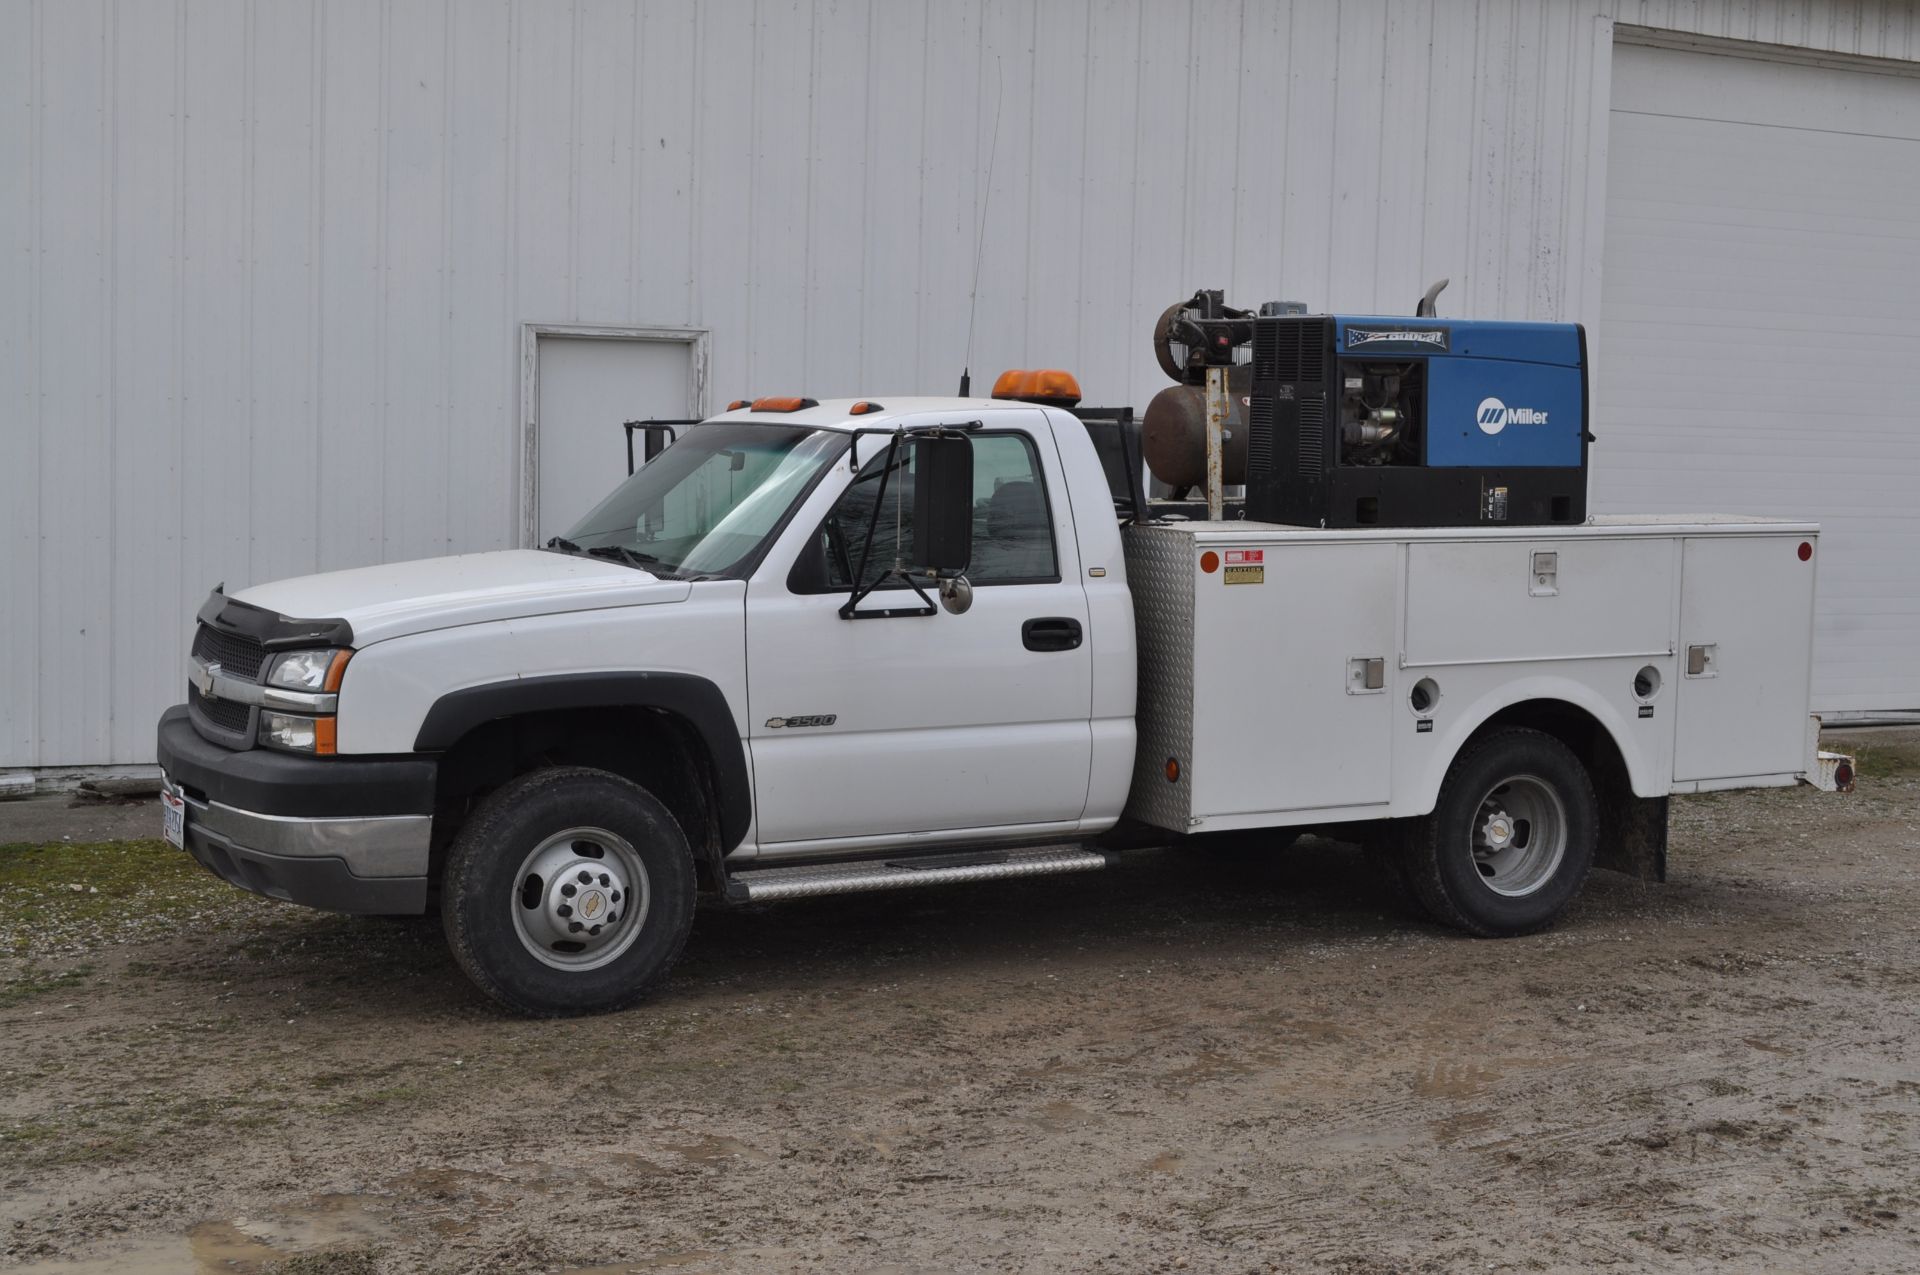 2003 Chevy 3500 service truck, standard cab, V-8 gas, automatic, 4x4, DRW, 42,206 miles, 9’ Stahl - Image 45 of 48